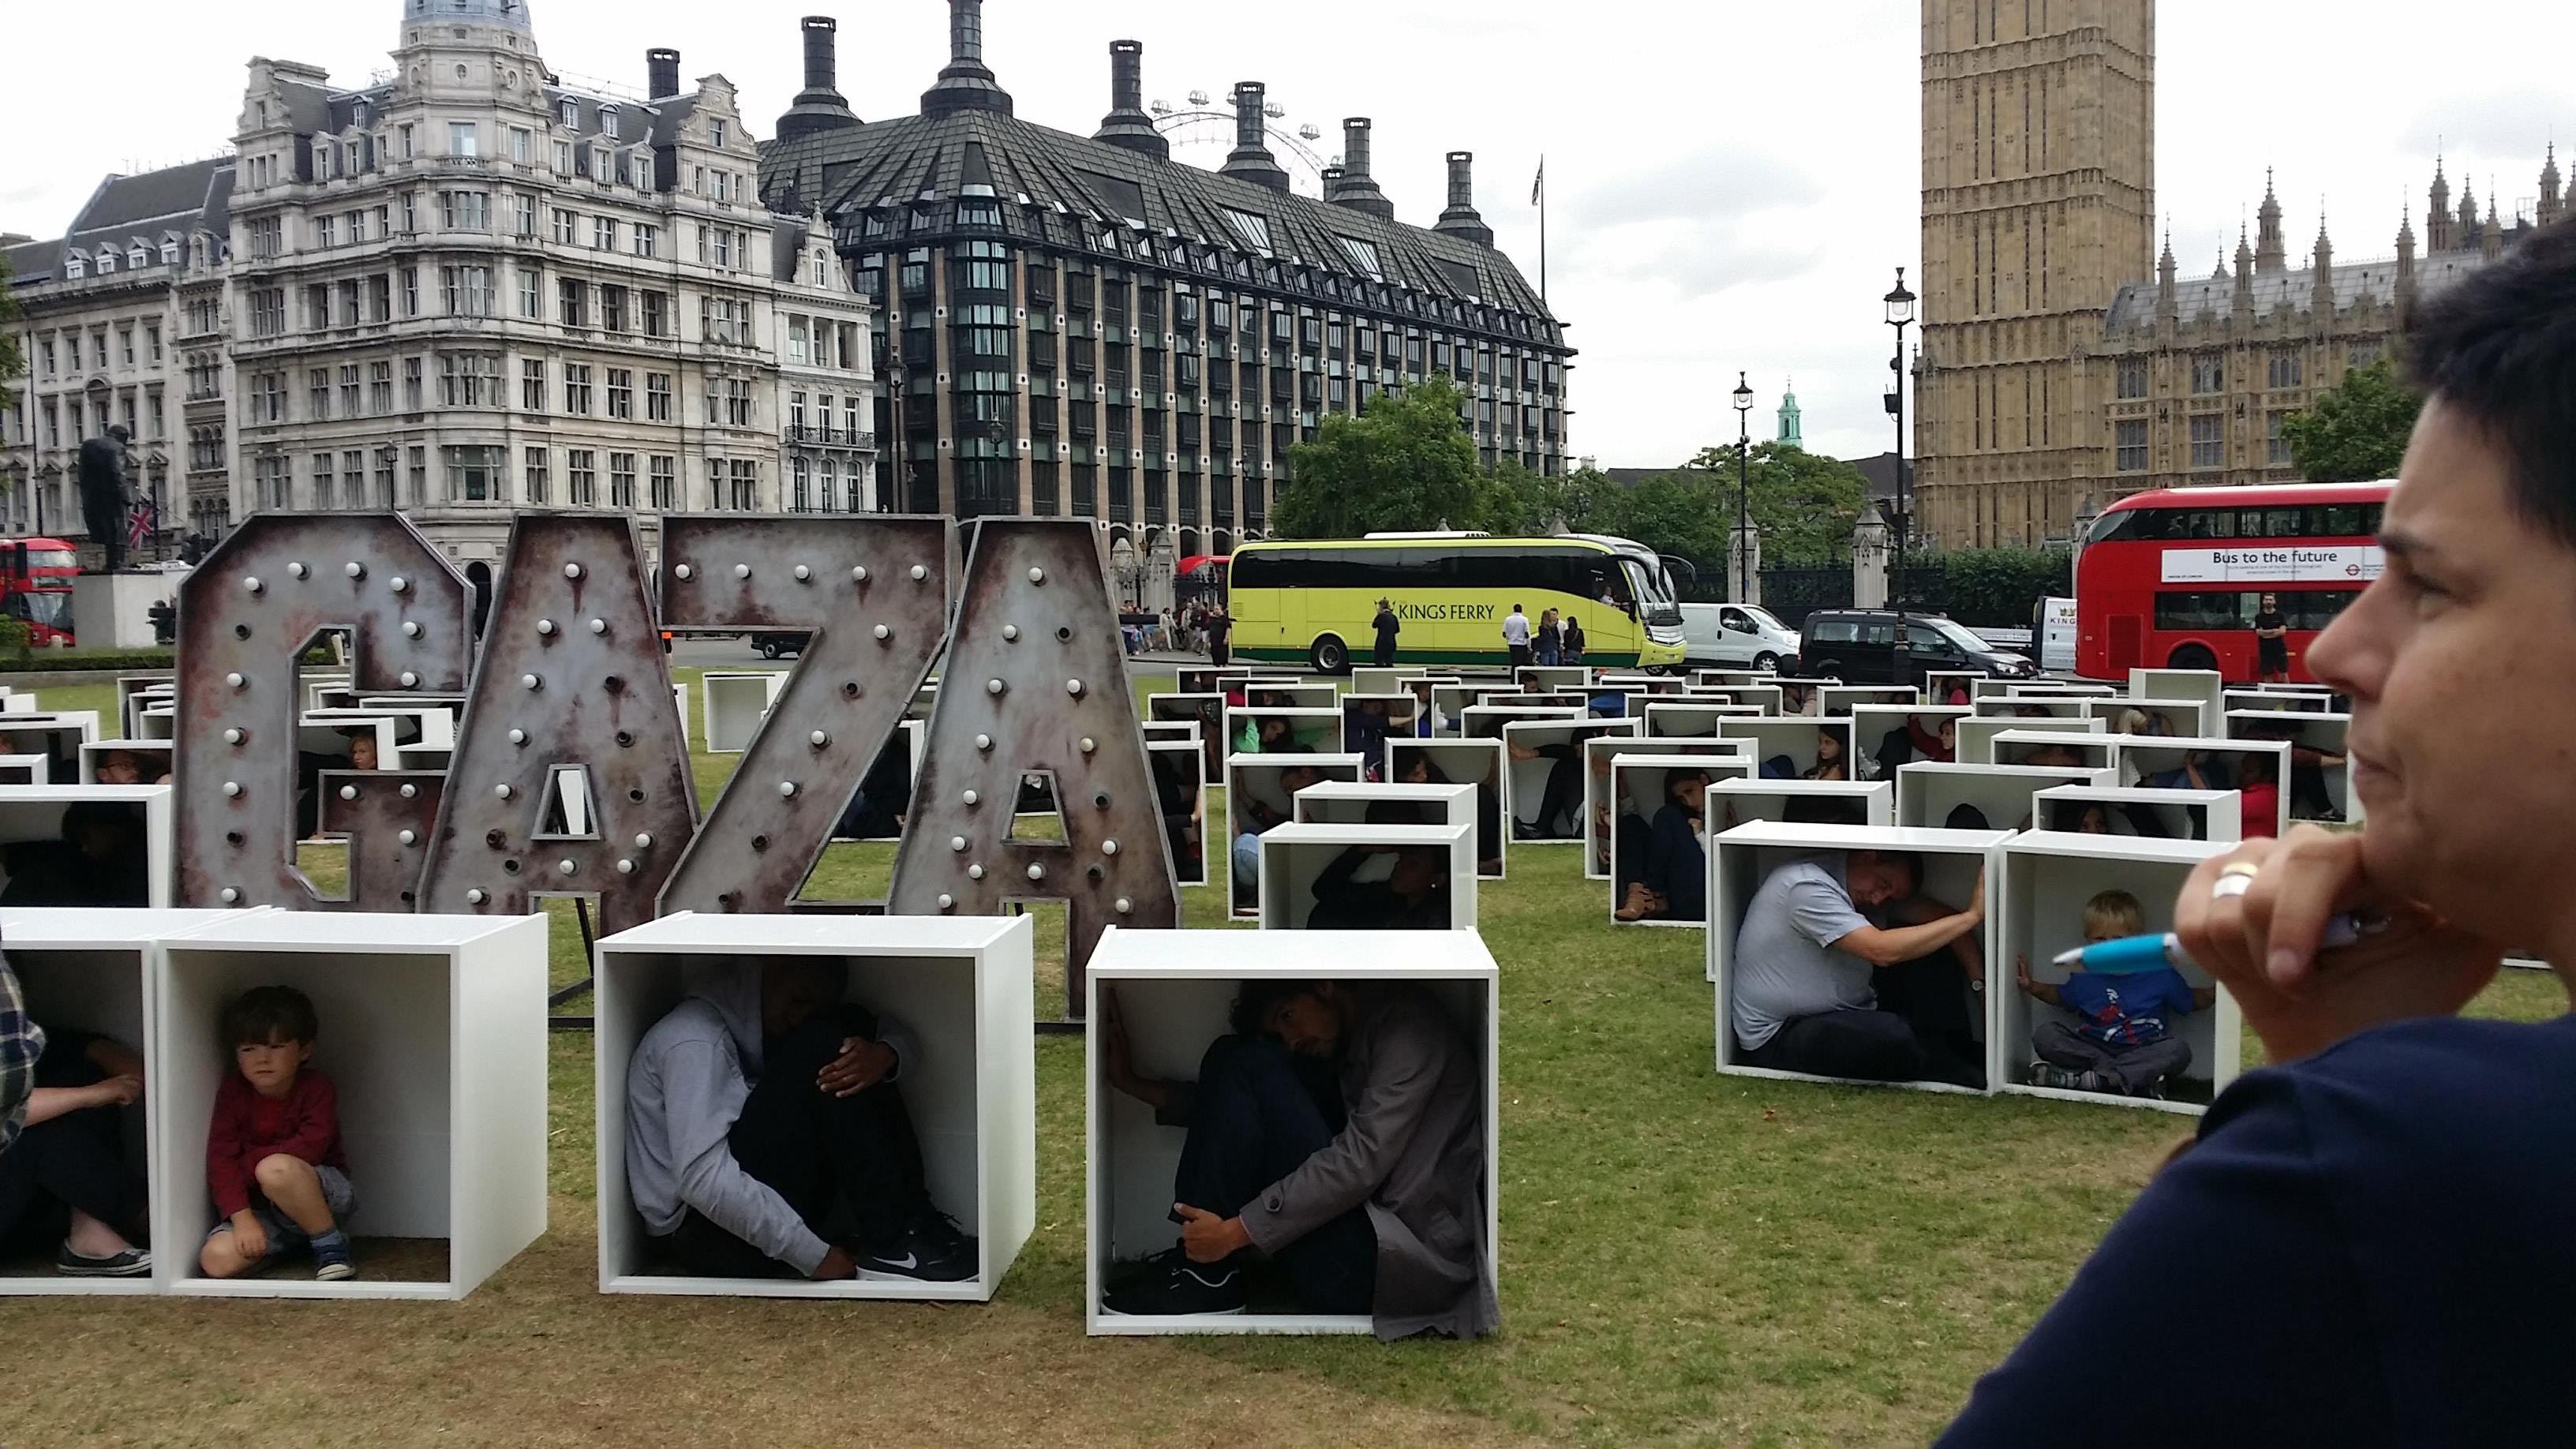 PICTURES: Parliament Square Occupied by Gaza protest